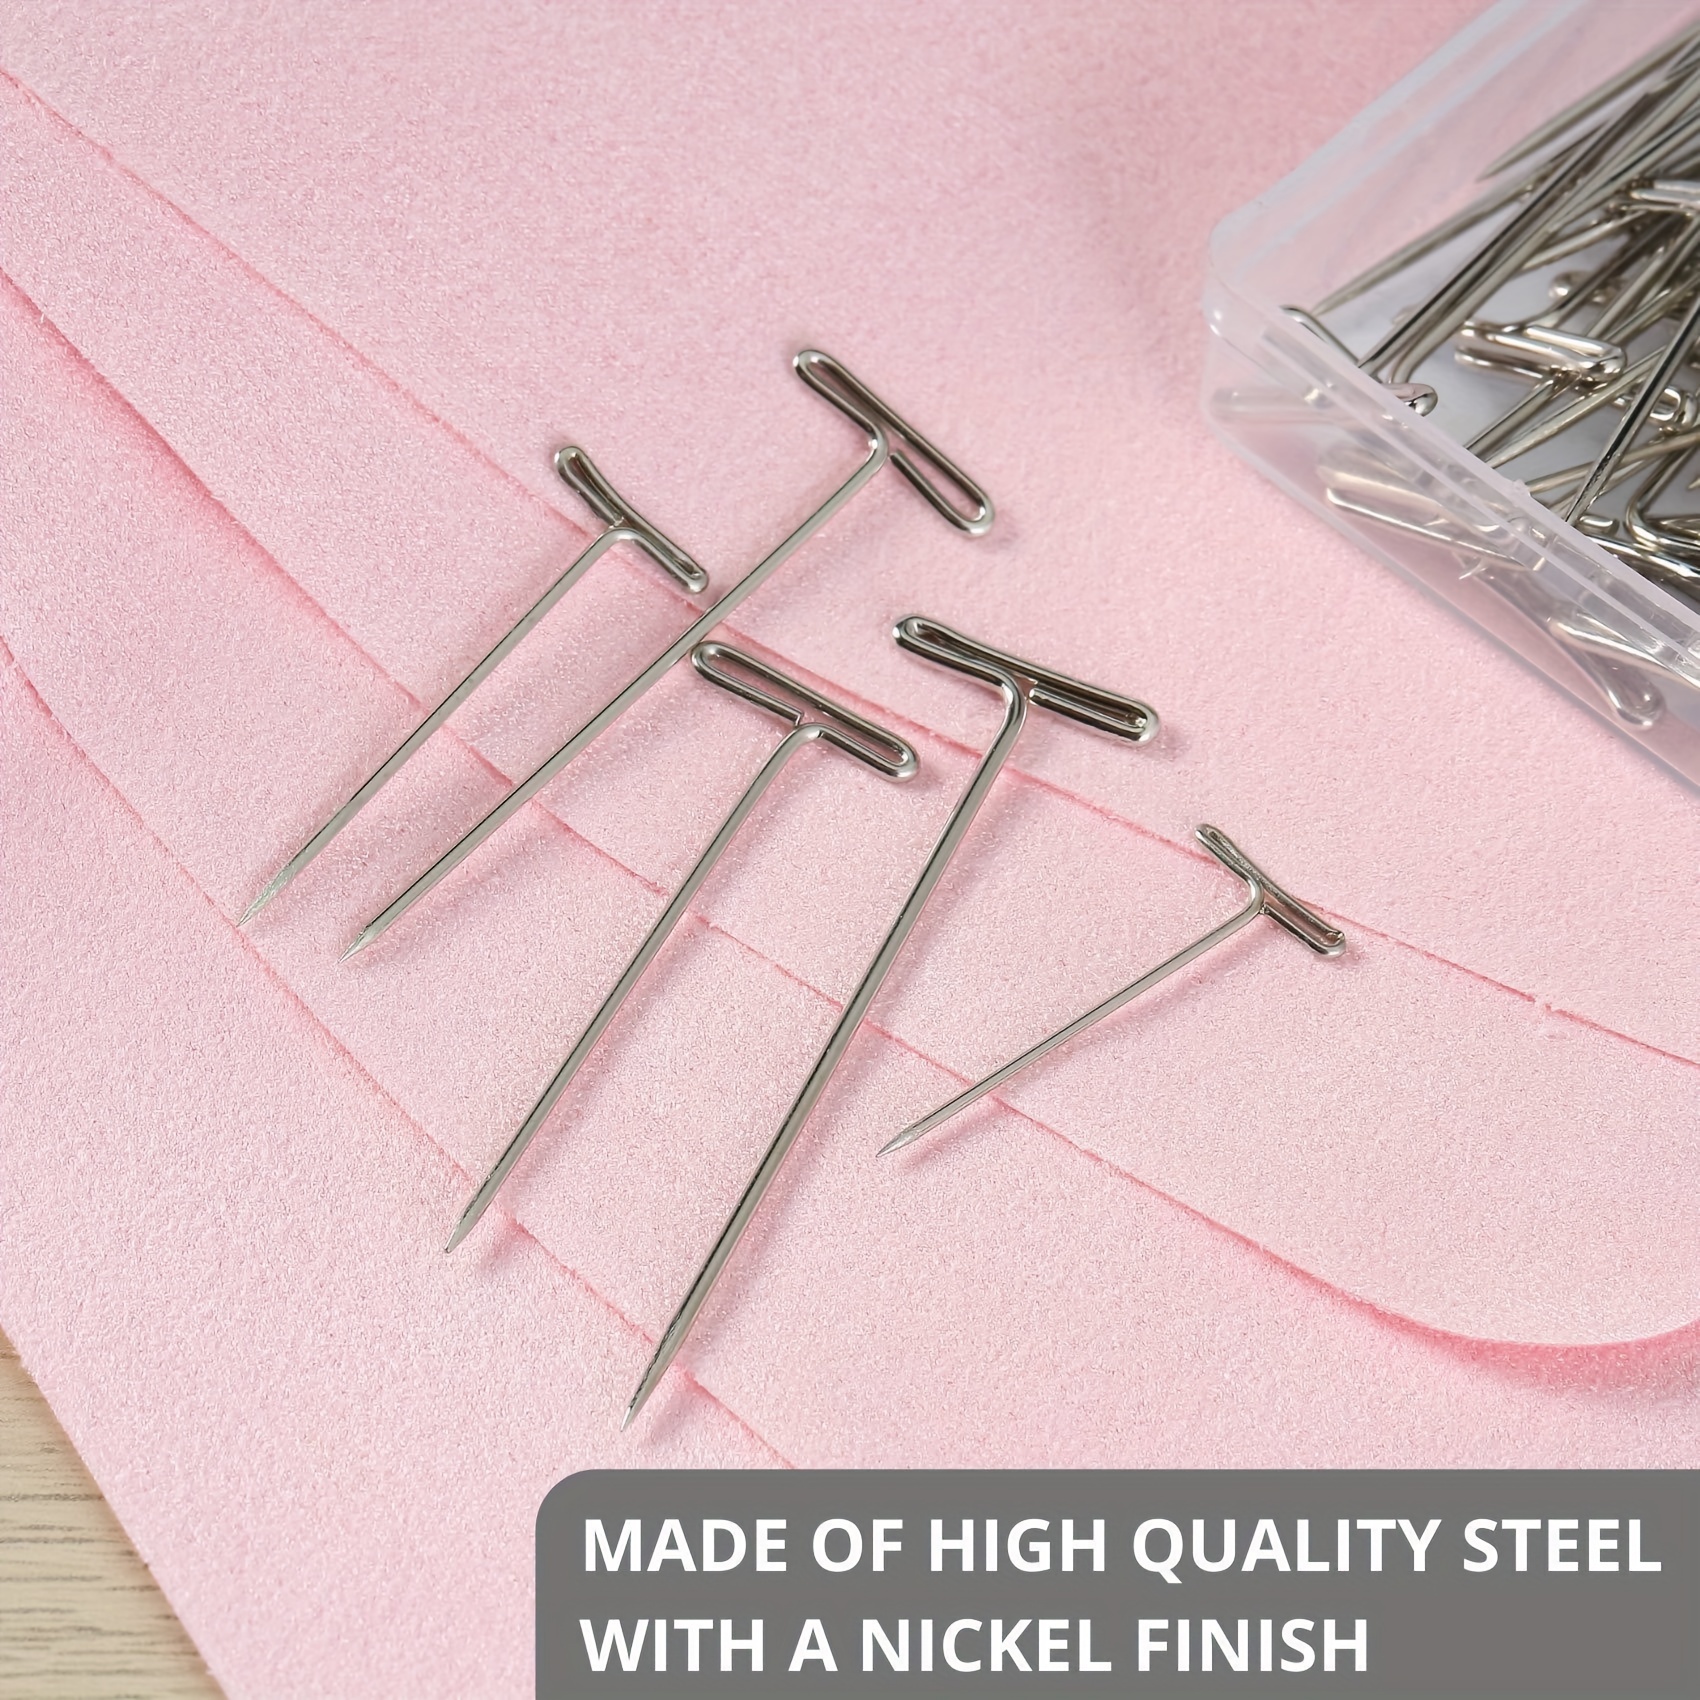 T Pins, Various Sizes, T Pins For Blocking Knitting, Wig Pins, T Pins For  Wigs, Wig Pins For Foam Head, T Pins For Sewing, Wig T Pins, Blocking Pins,  T Pins For